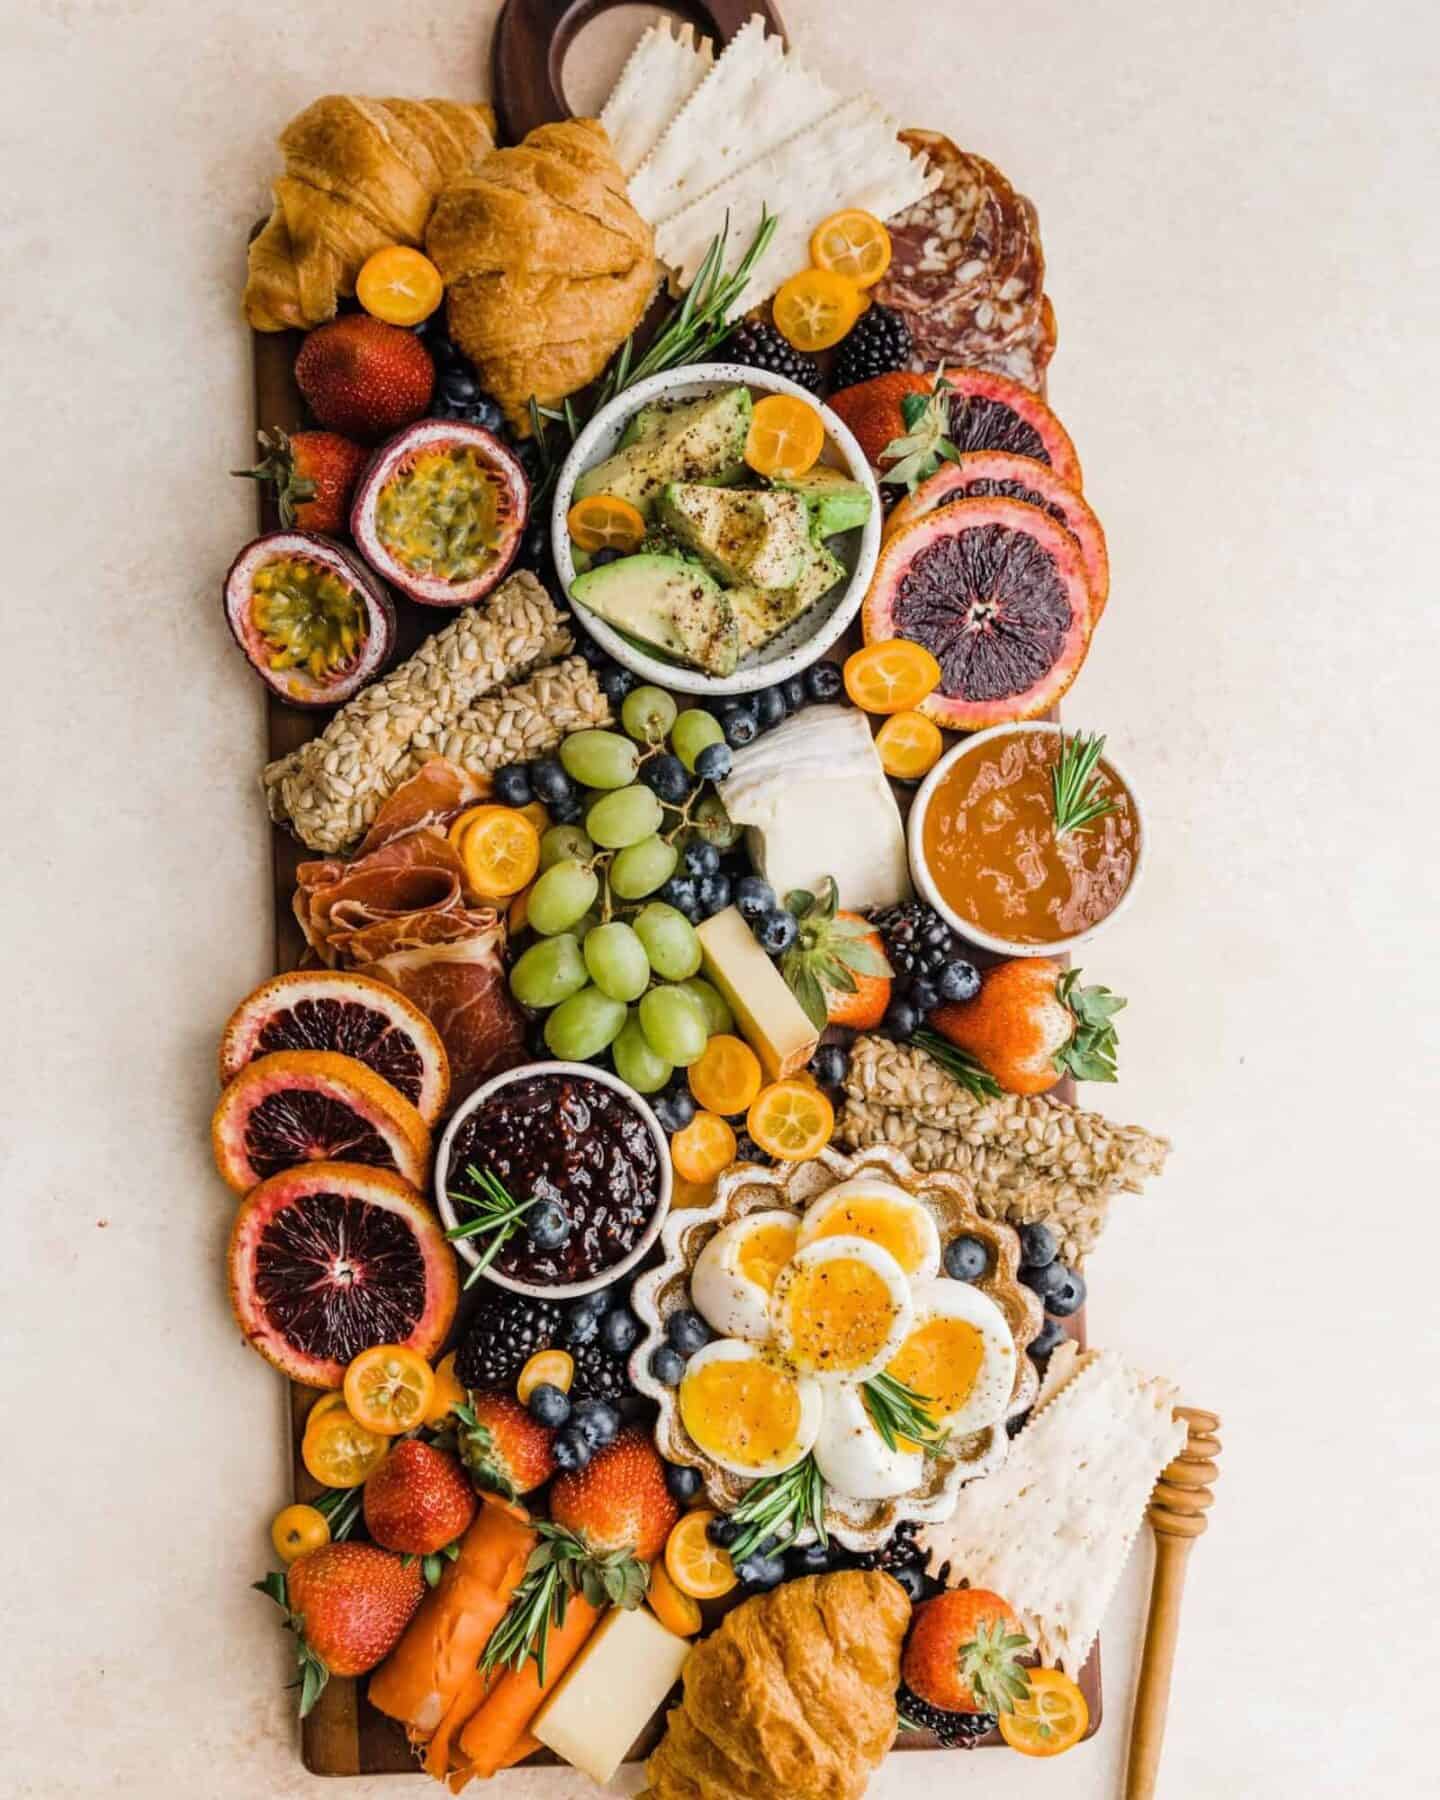 A colorful and diverse charcuterie board filled with an assortment of fruits, cheeses, meats, and pastries.